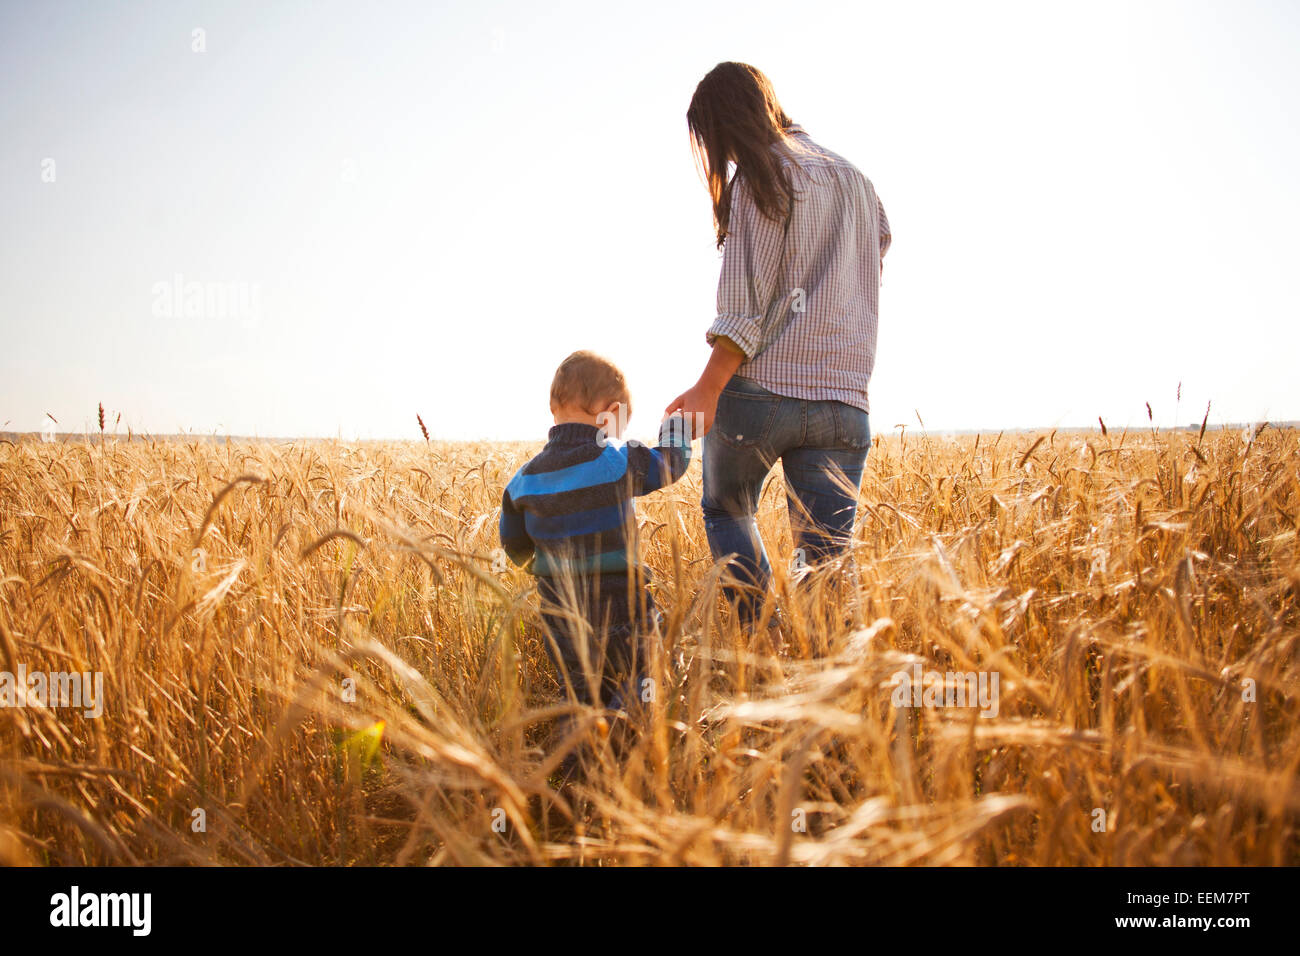 Caucasian mother and son walking in rural field Banque D'Images